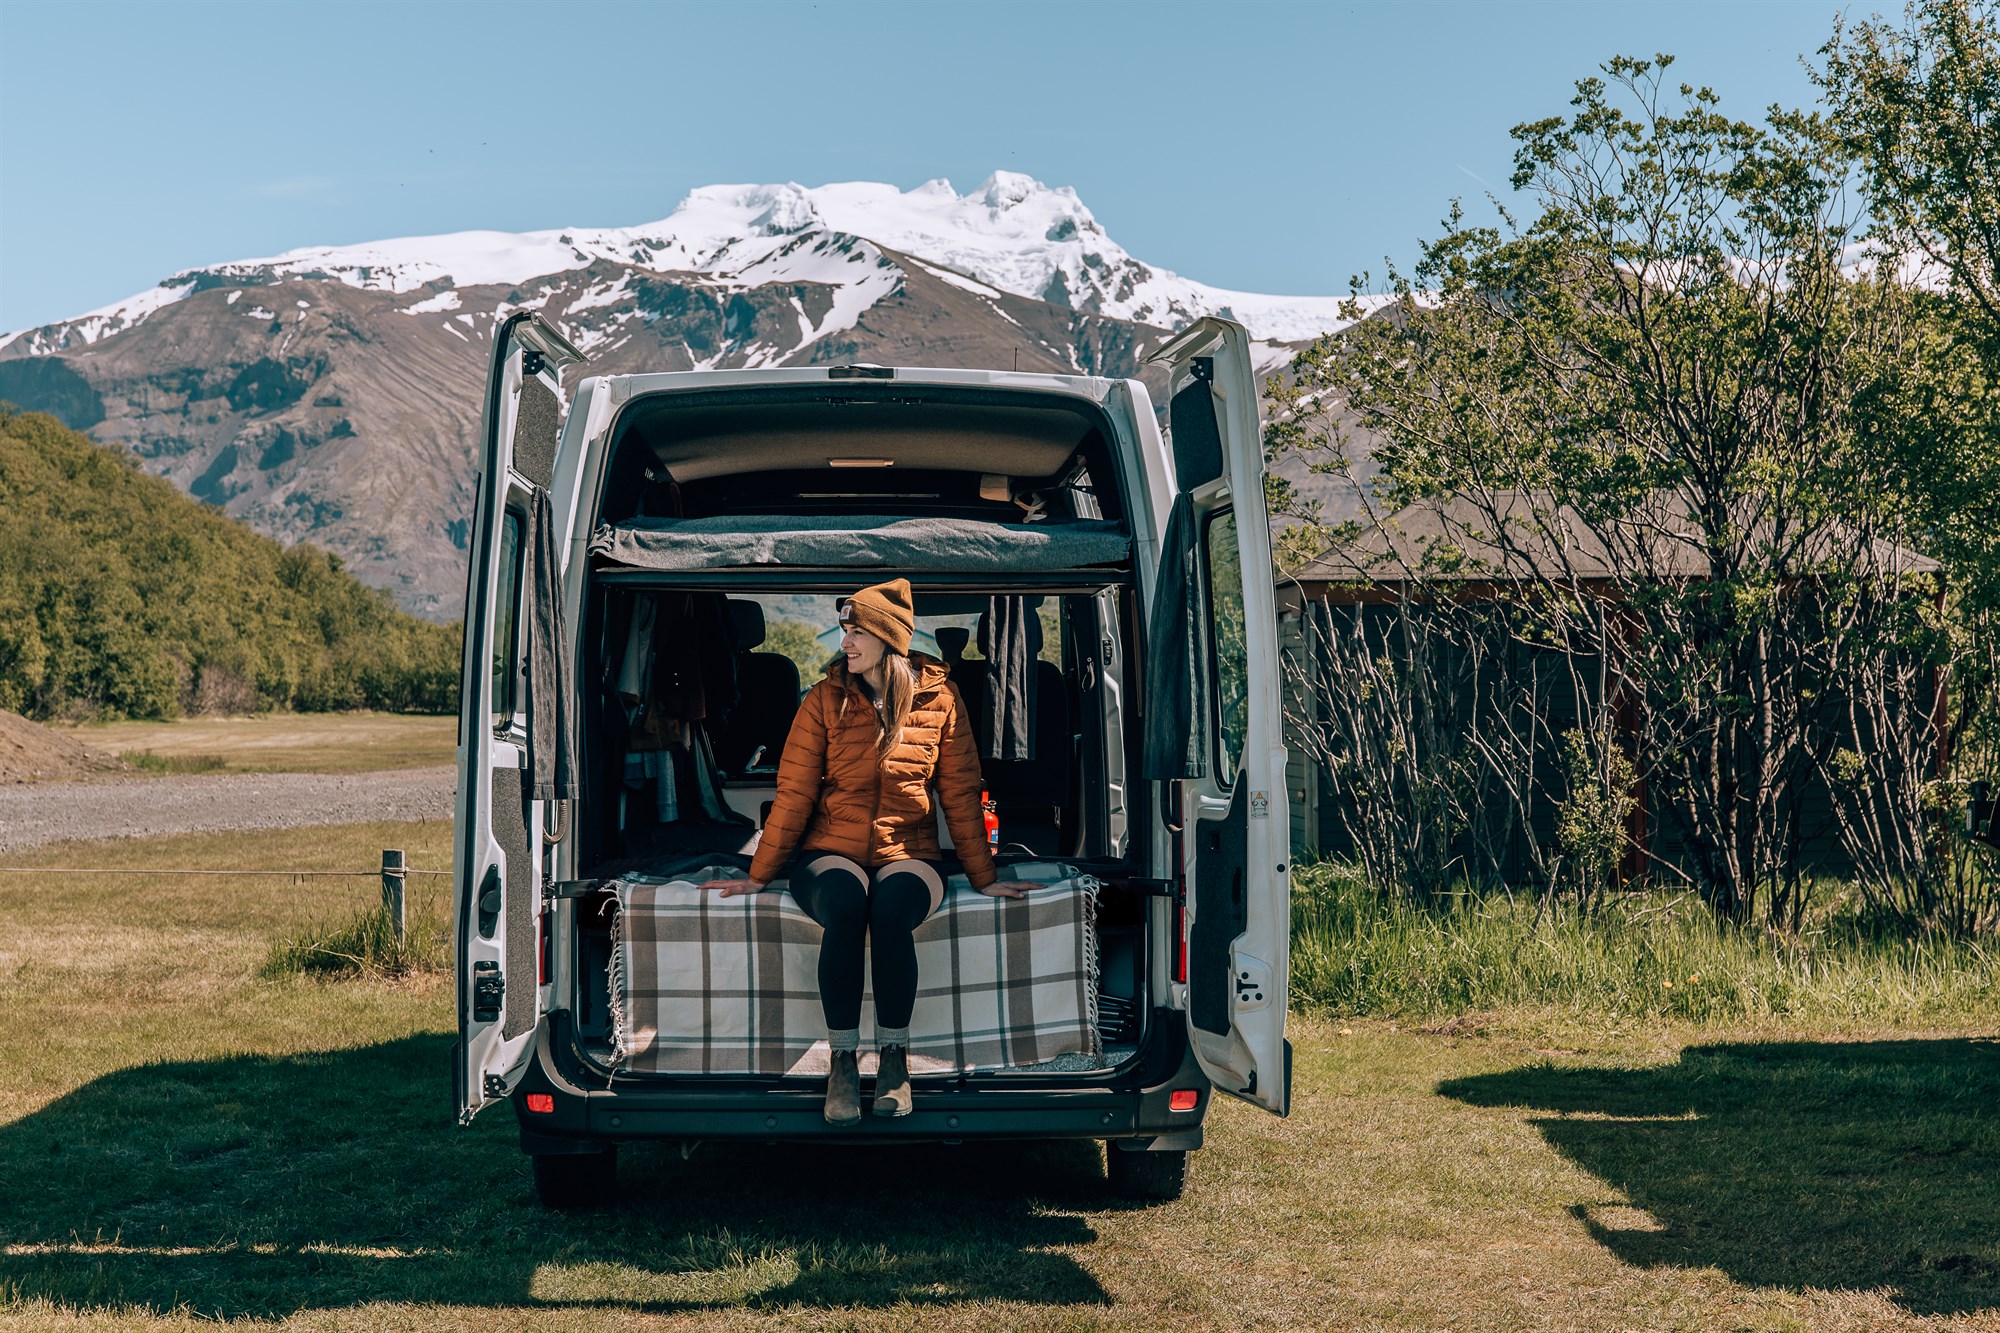 Full guide for a campervan trip in Iceland